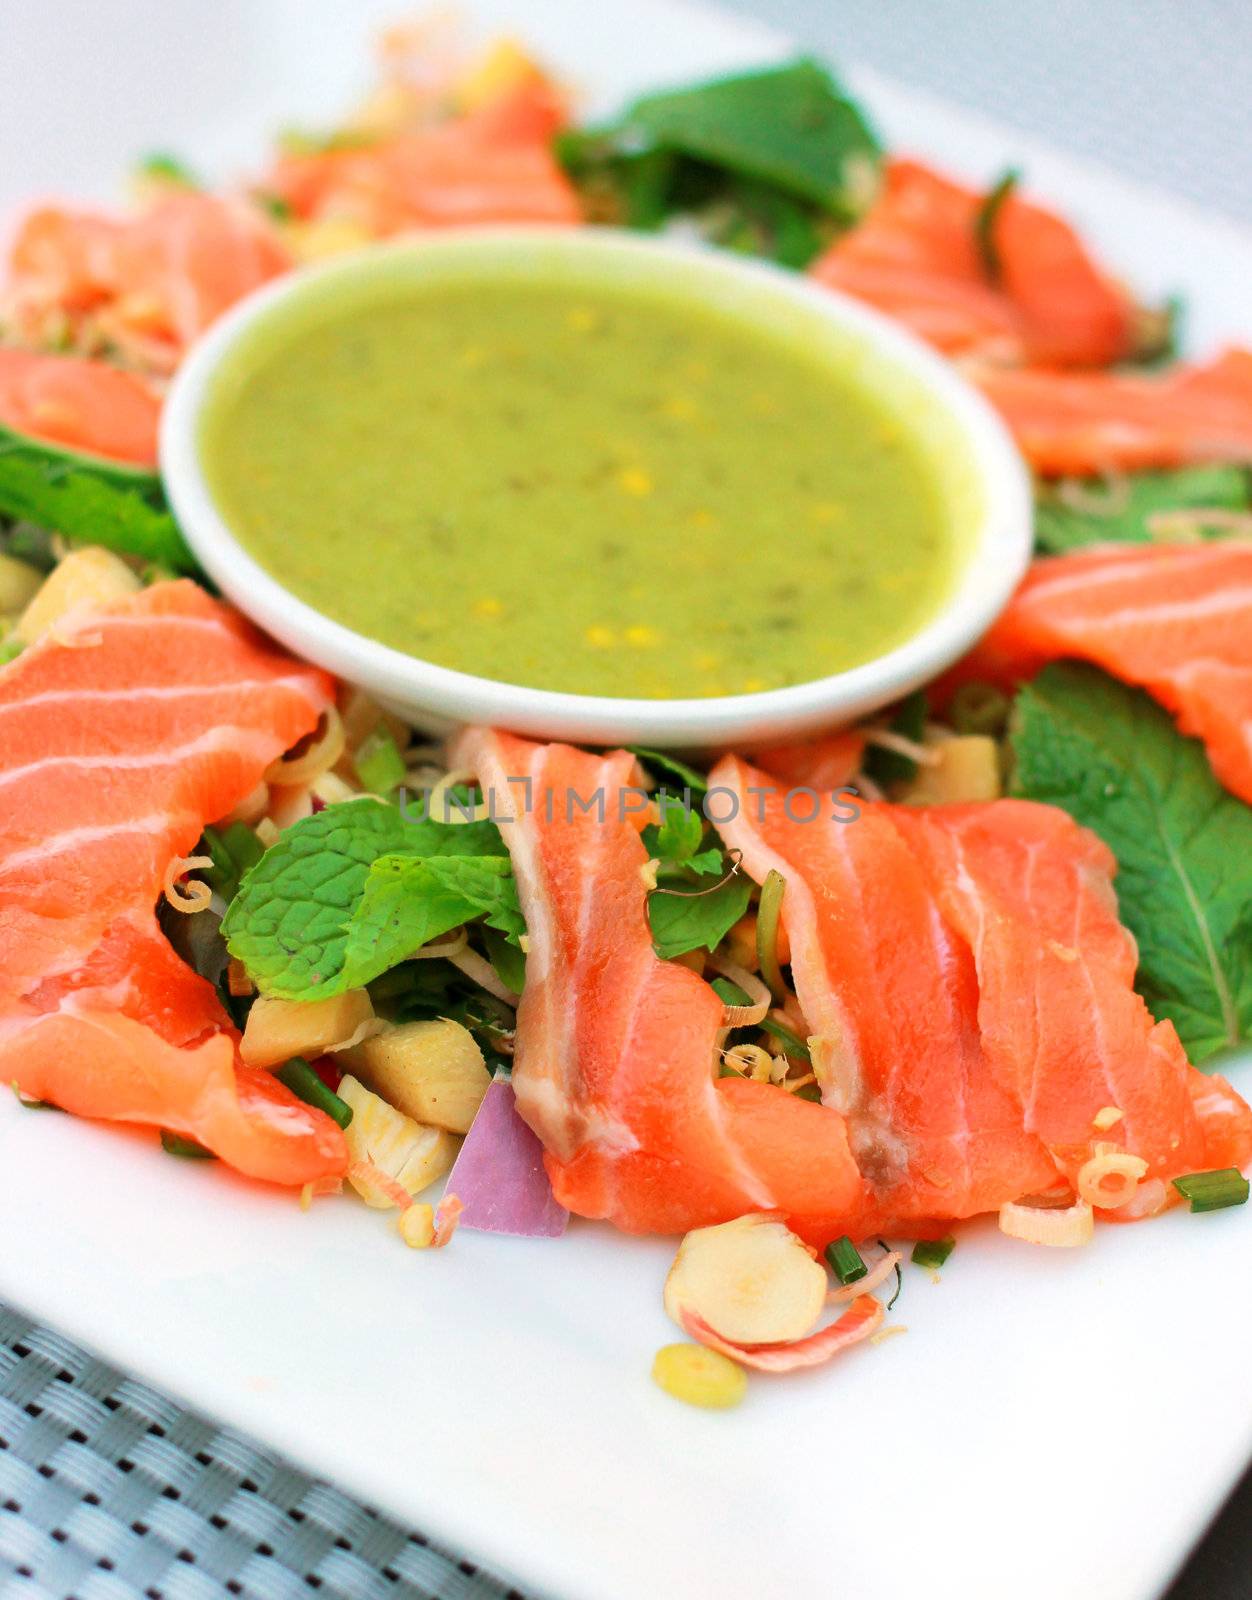 Spicy salmon salad with wasabi sauce by nuchylee